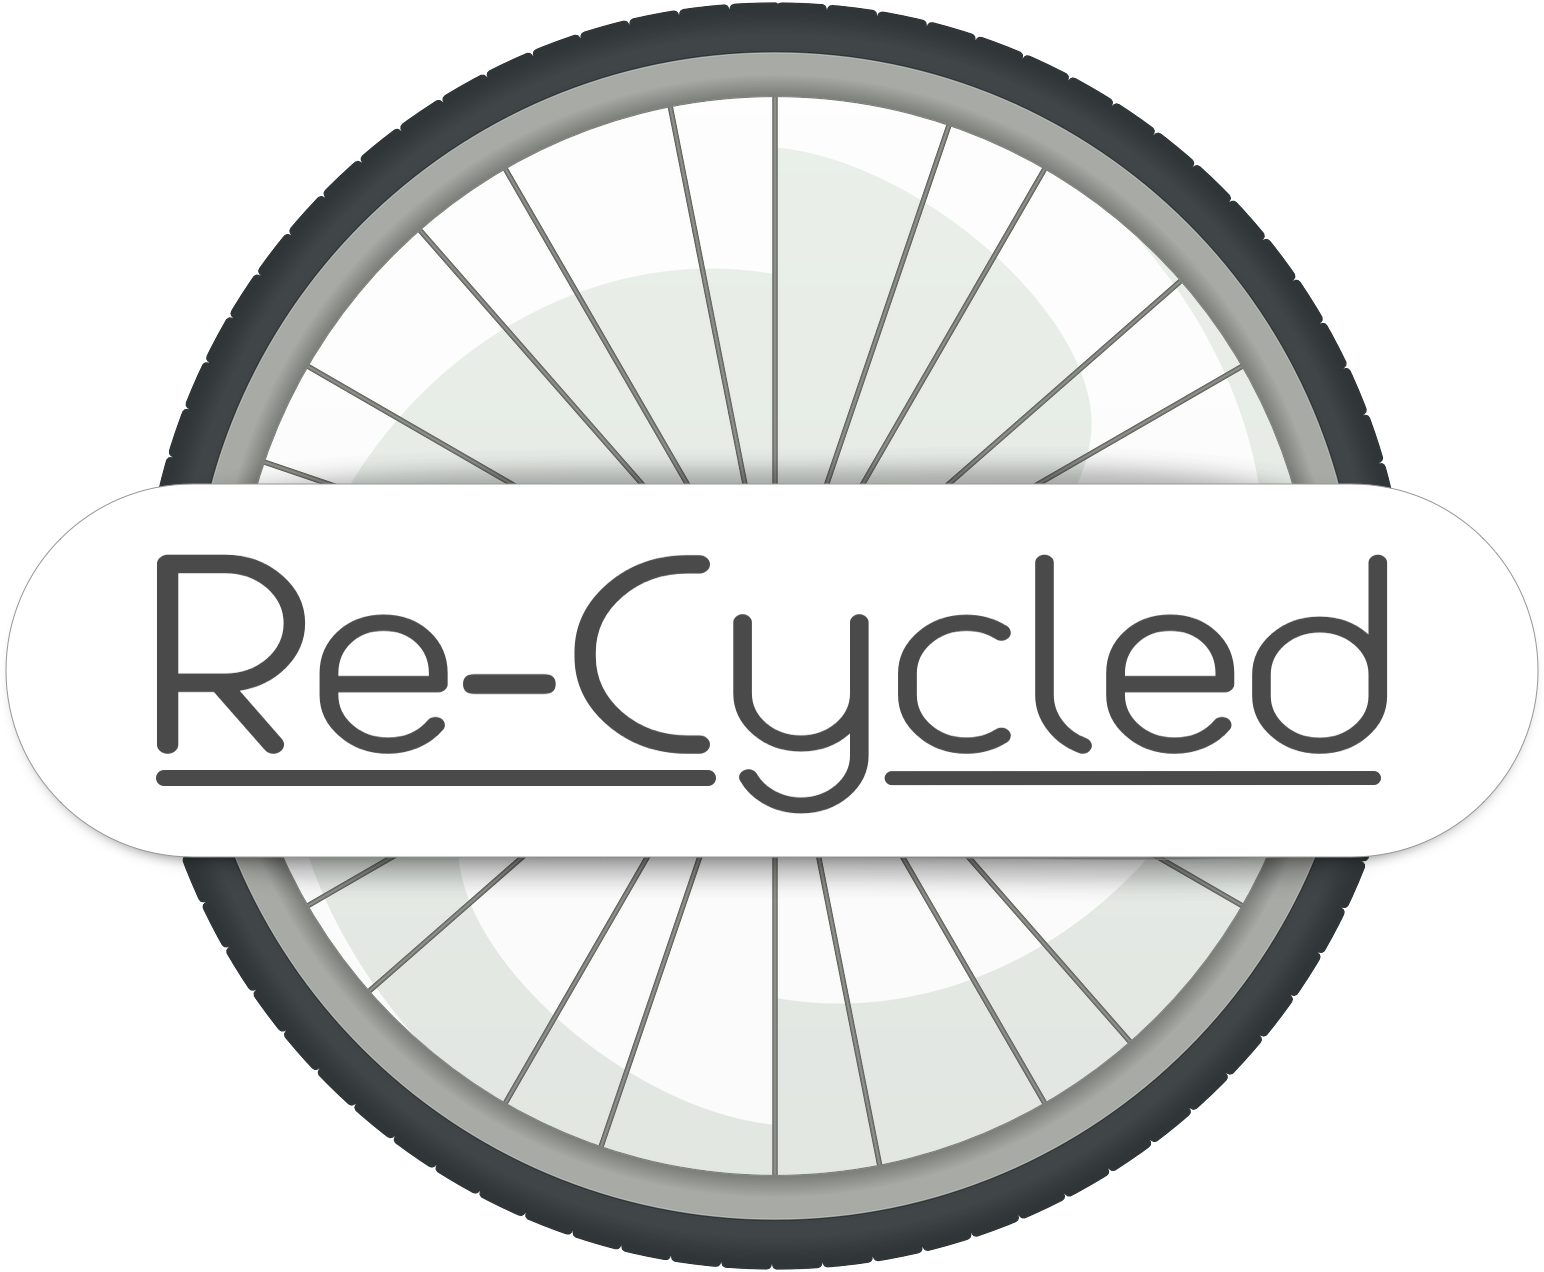 Re-cycled.com home